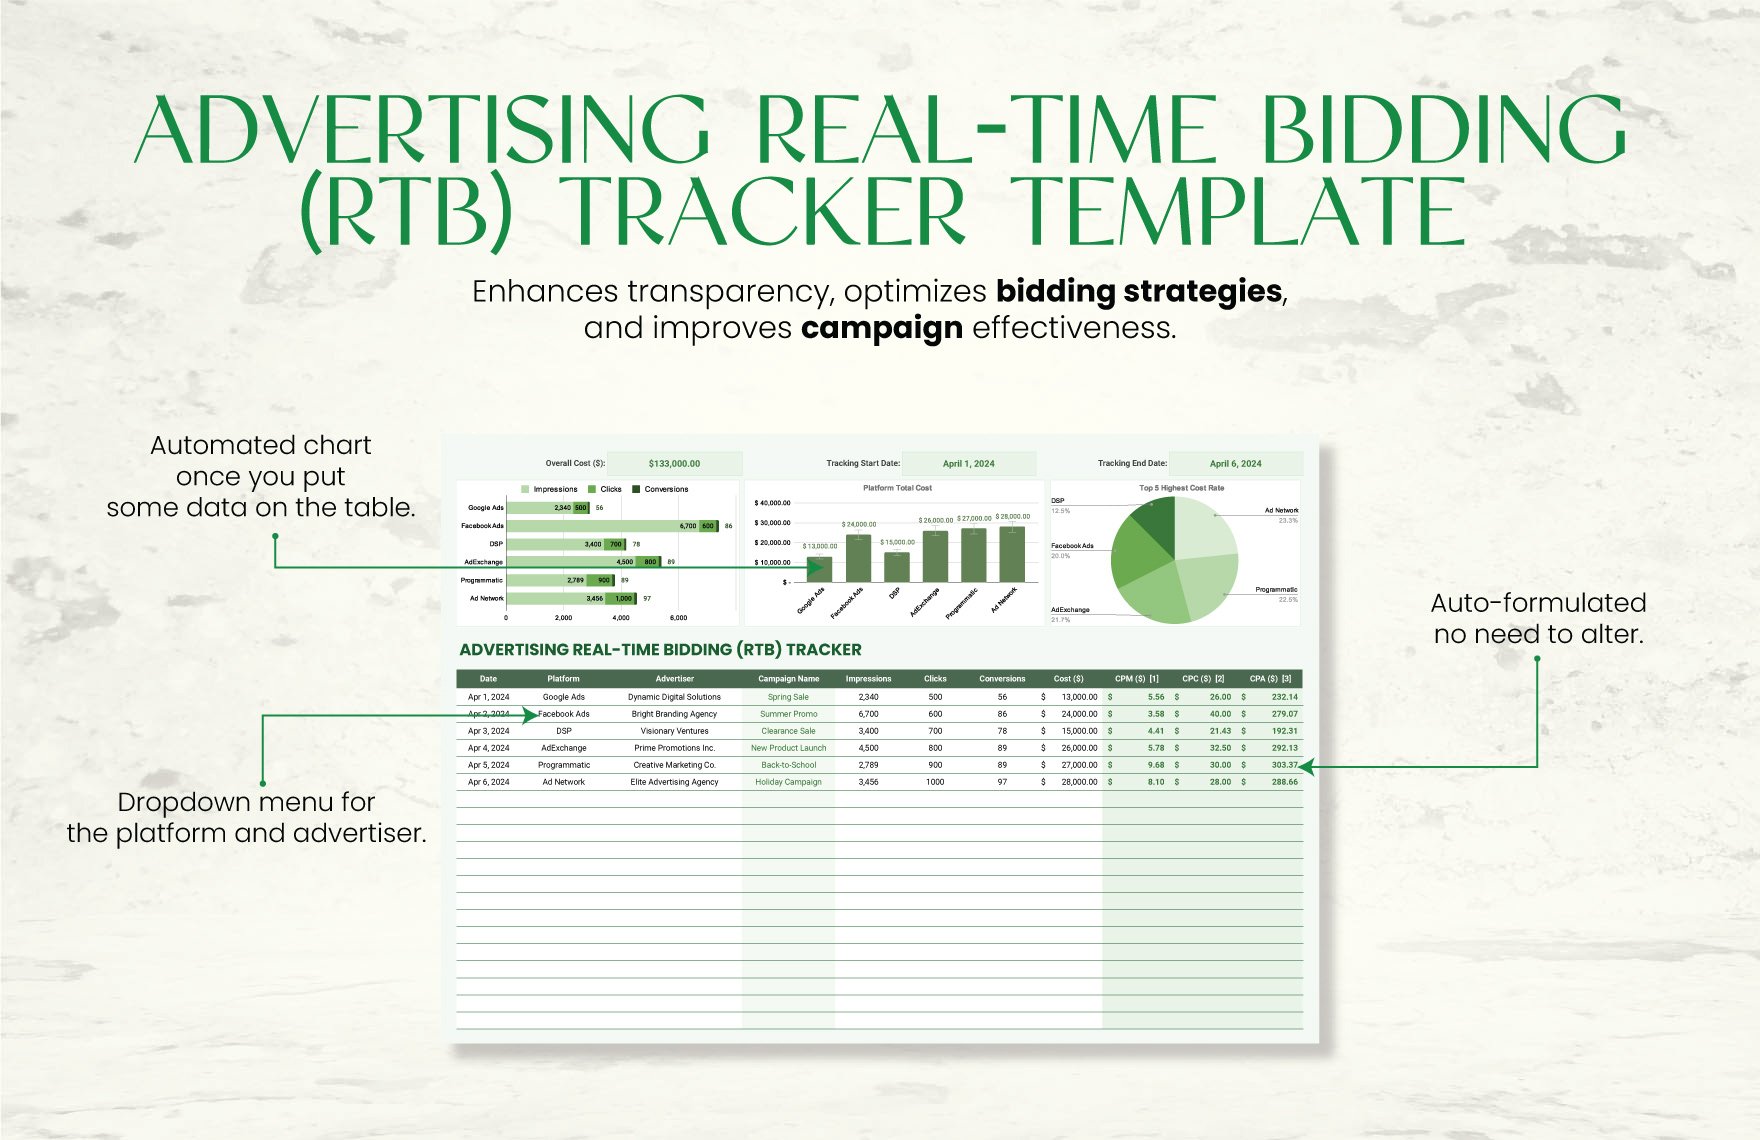 Advertising Real-Time Bidding (RTB) Tracker Template